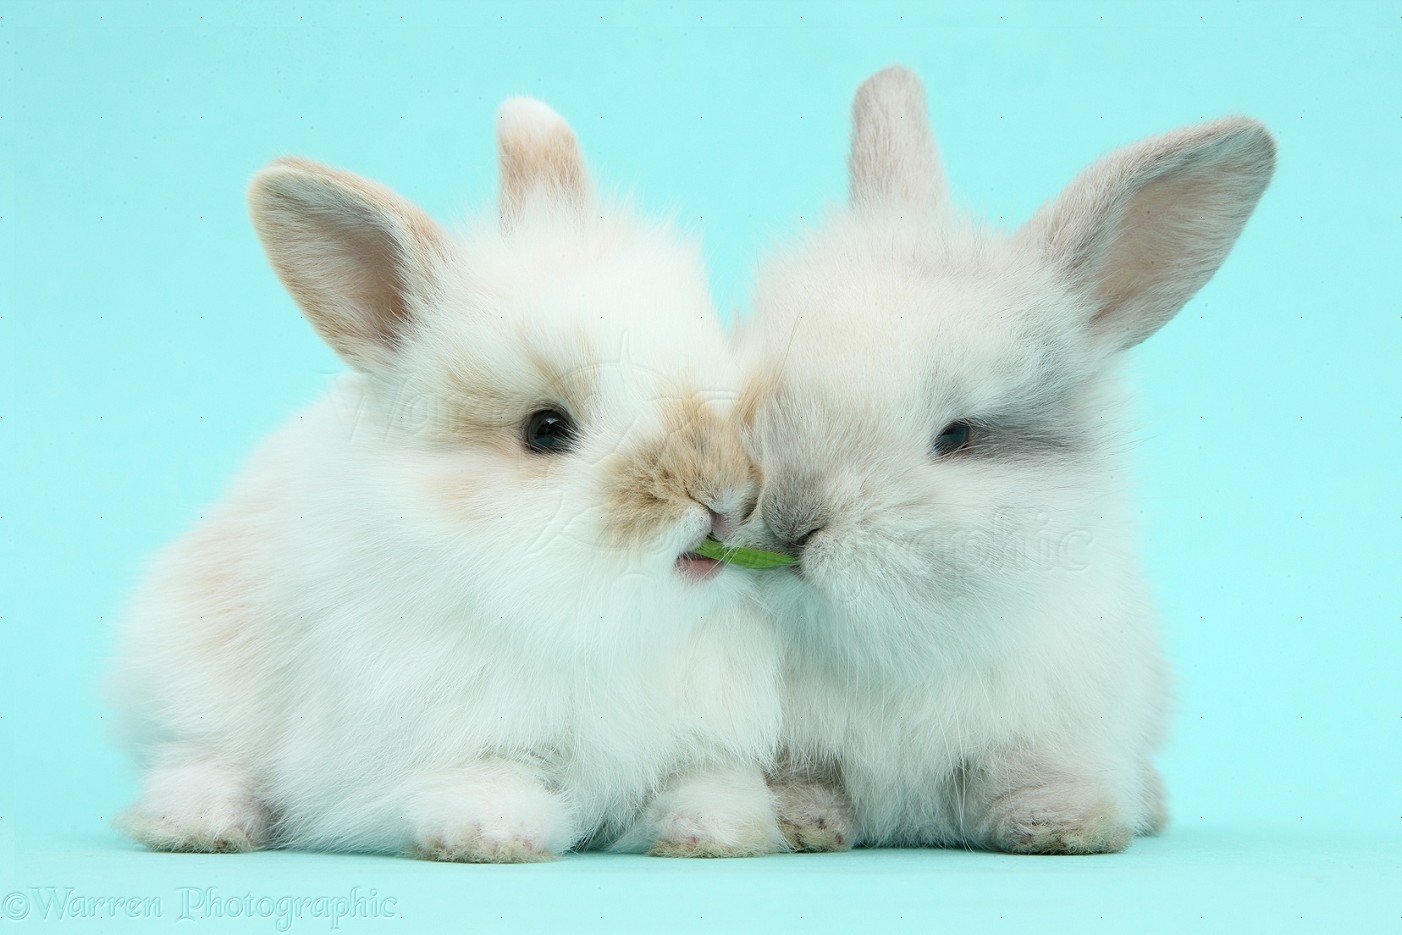 Cute Baby Bunnies On Blue Background Photo Wp40457